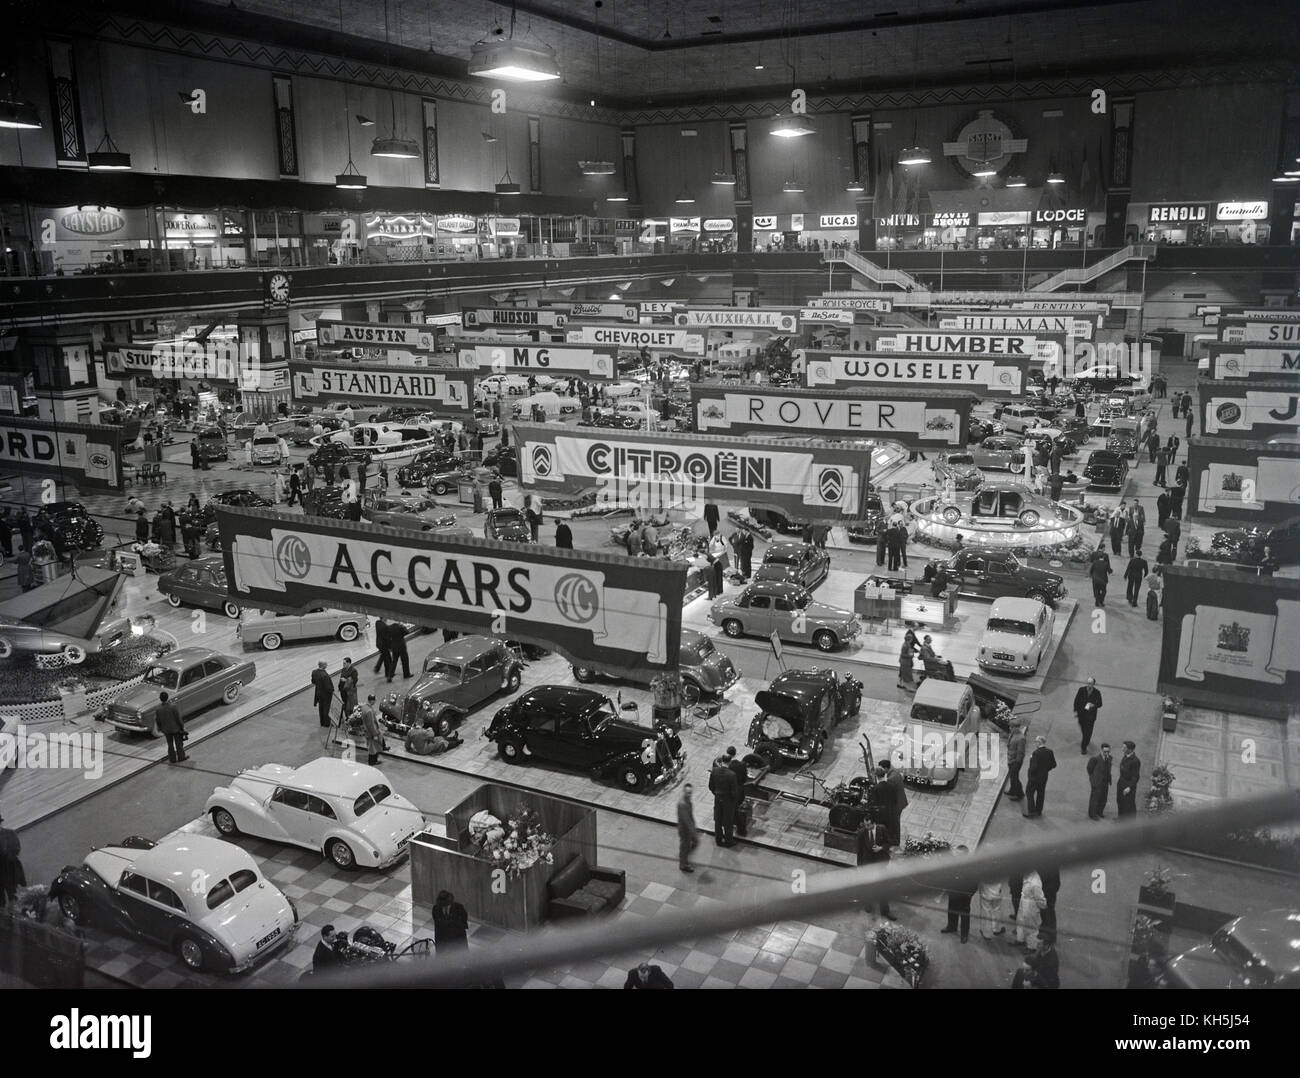 The 1955 Motor Show at Earl's Court in London, showing a variety of car manufacturers and their current models on display. Manufacturers on show include AC, Citroen, Rover, Wolseley, Humber, Standard, MG, Austin, Chevrolet, Studebaker, Vauxhall, Hillman, and Hudson. Stock Photo